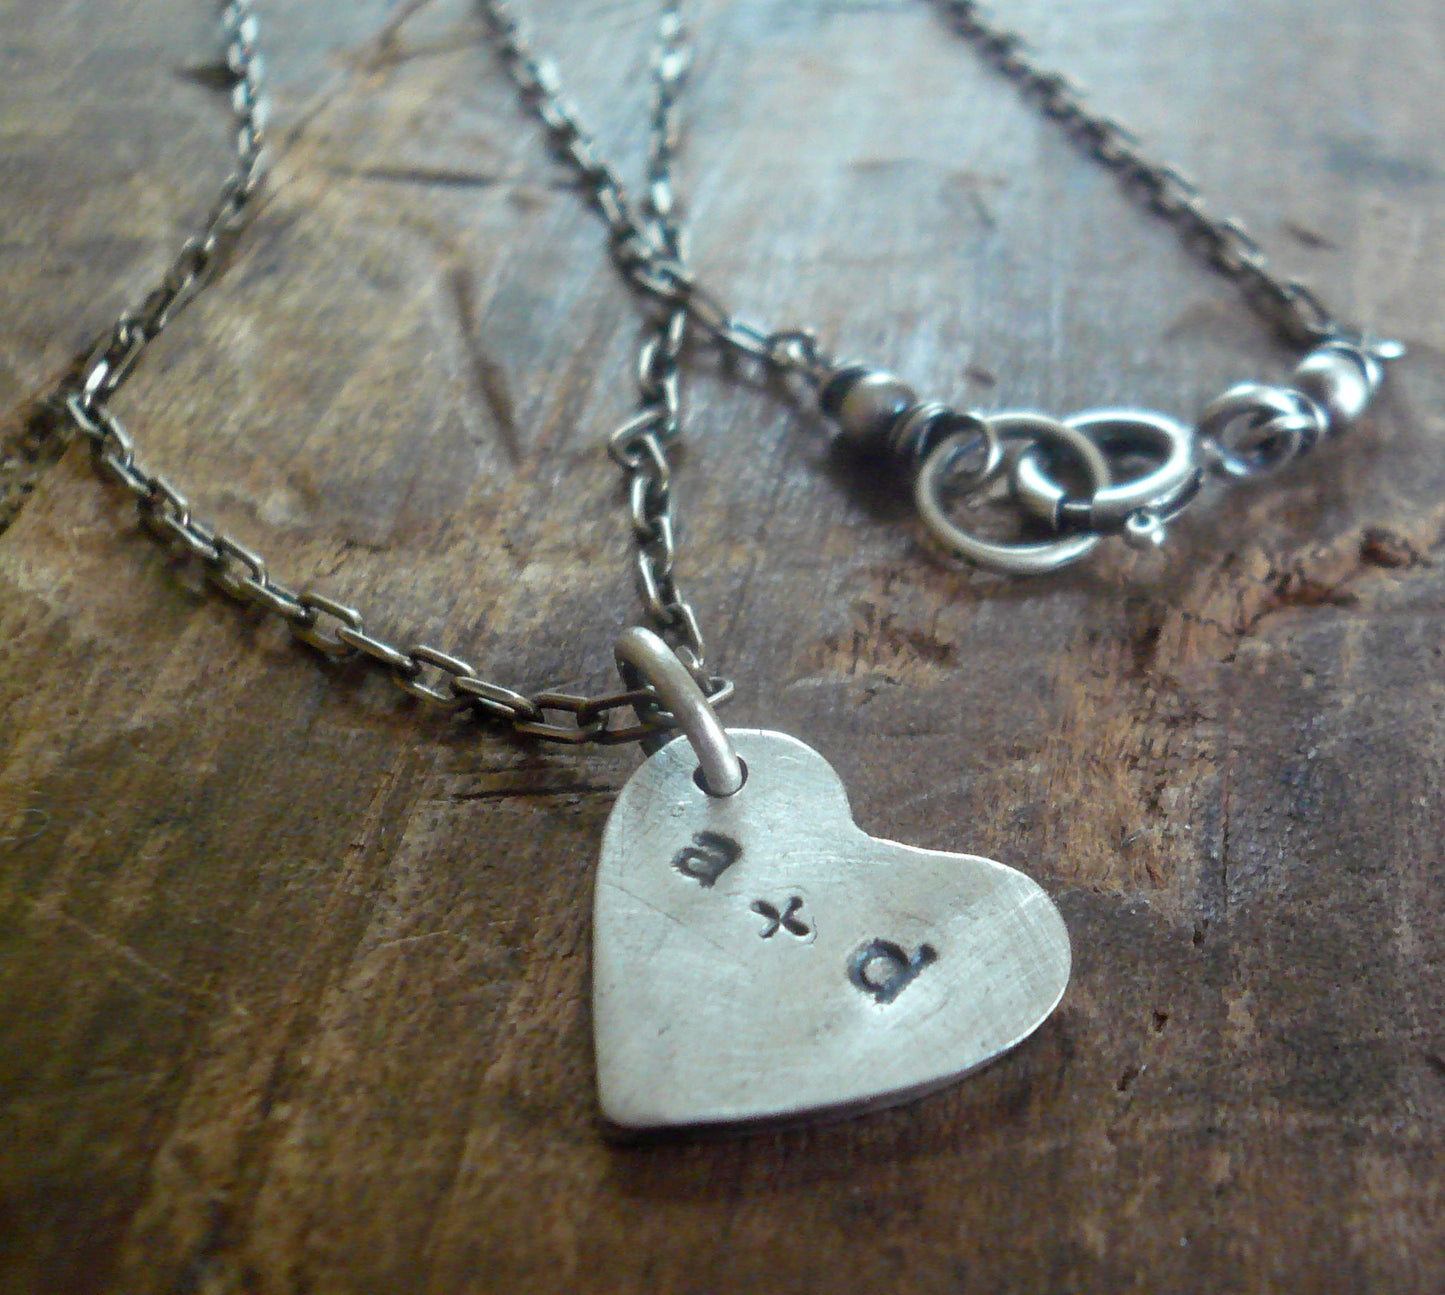 Sweethearts Necklace - Handmade. Oxidized Fine and Sterling Silver Personalized Heart Charm Necklace